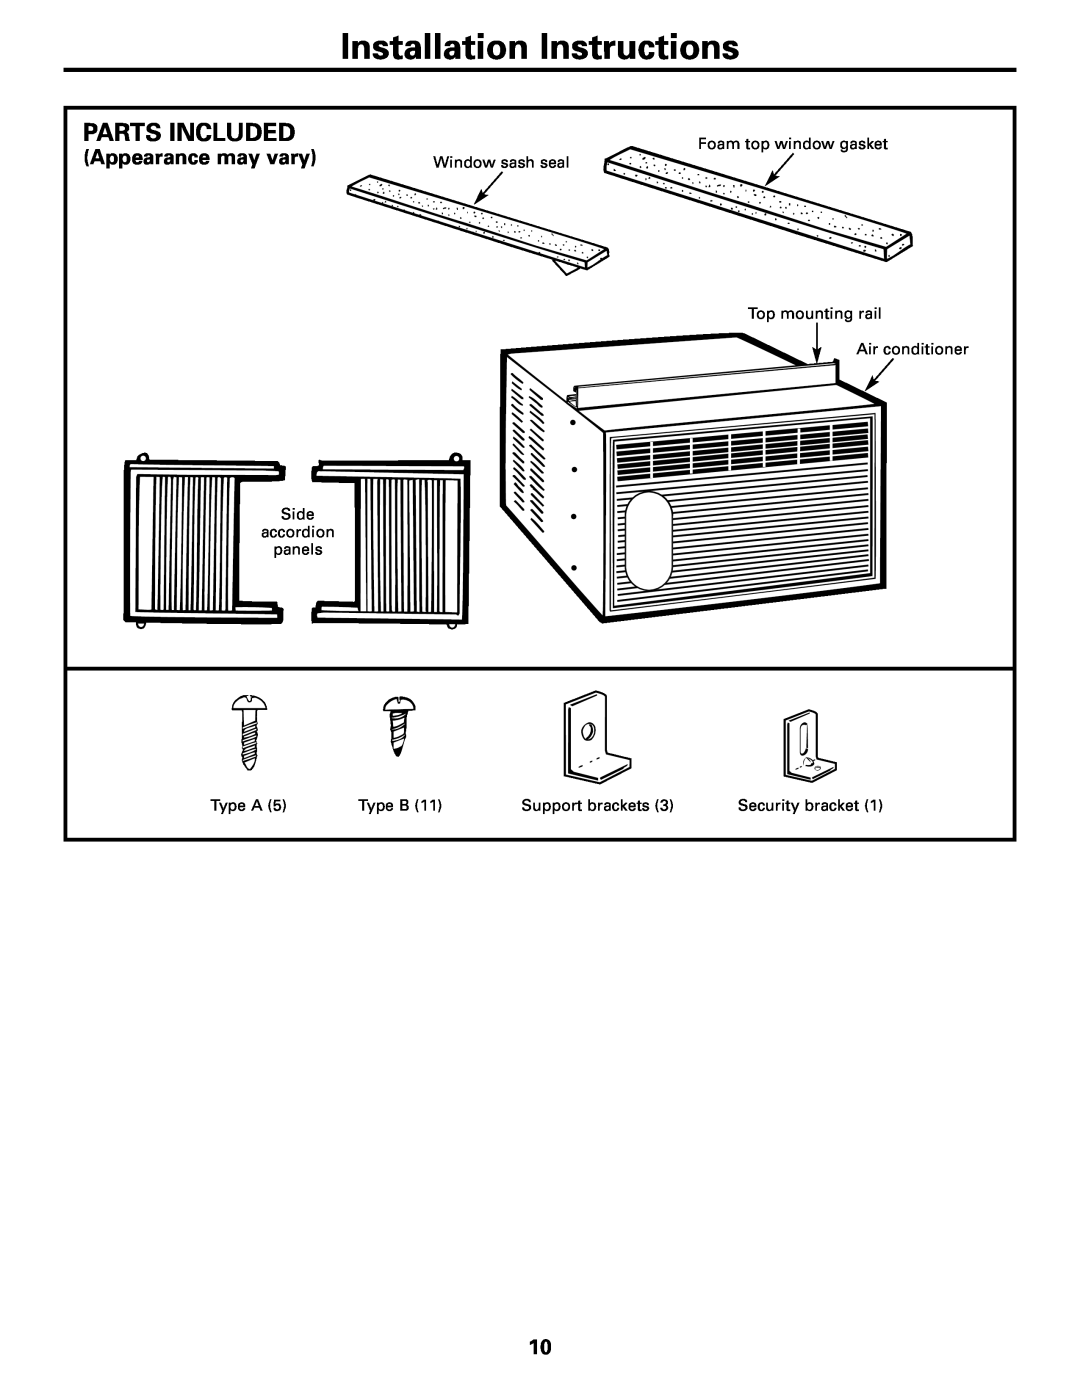 GE AGW06, AGH06 operating instructions Installation Instructions, Parts Included, Appearance may vary 